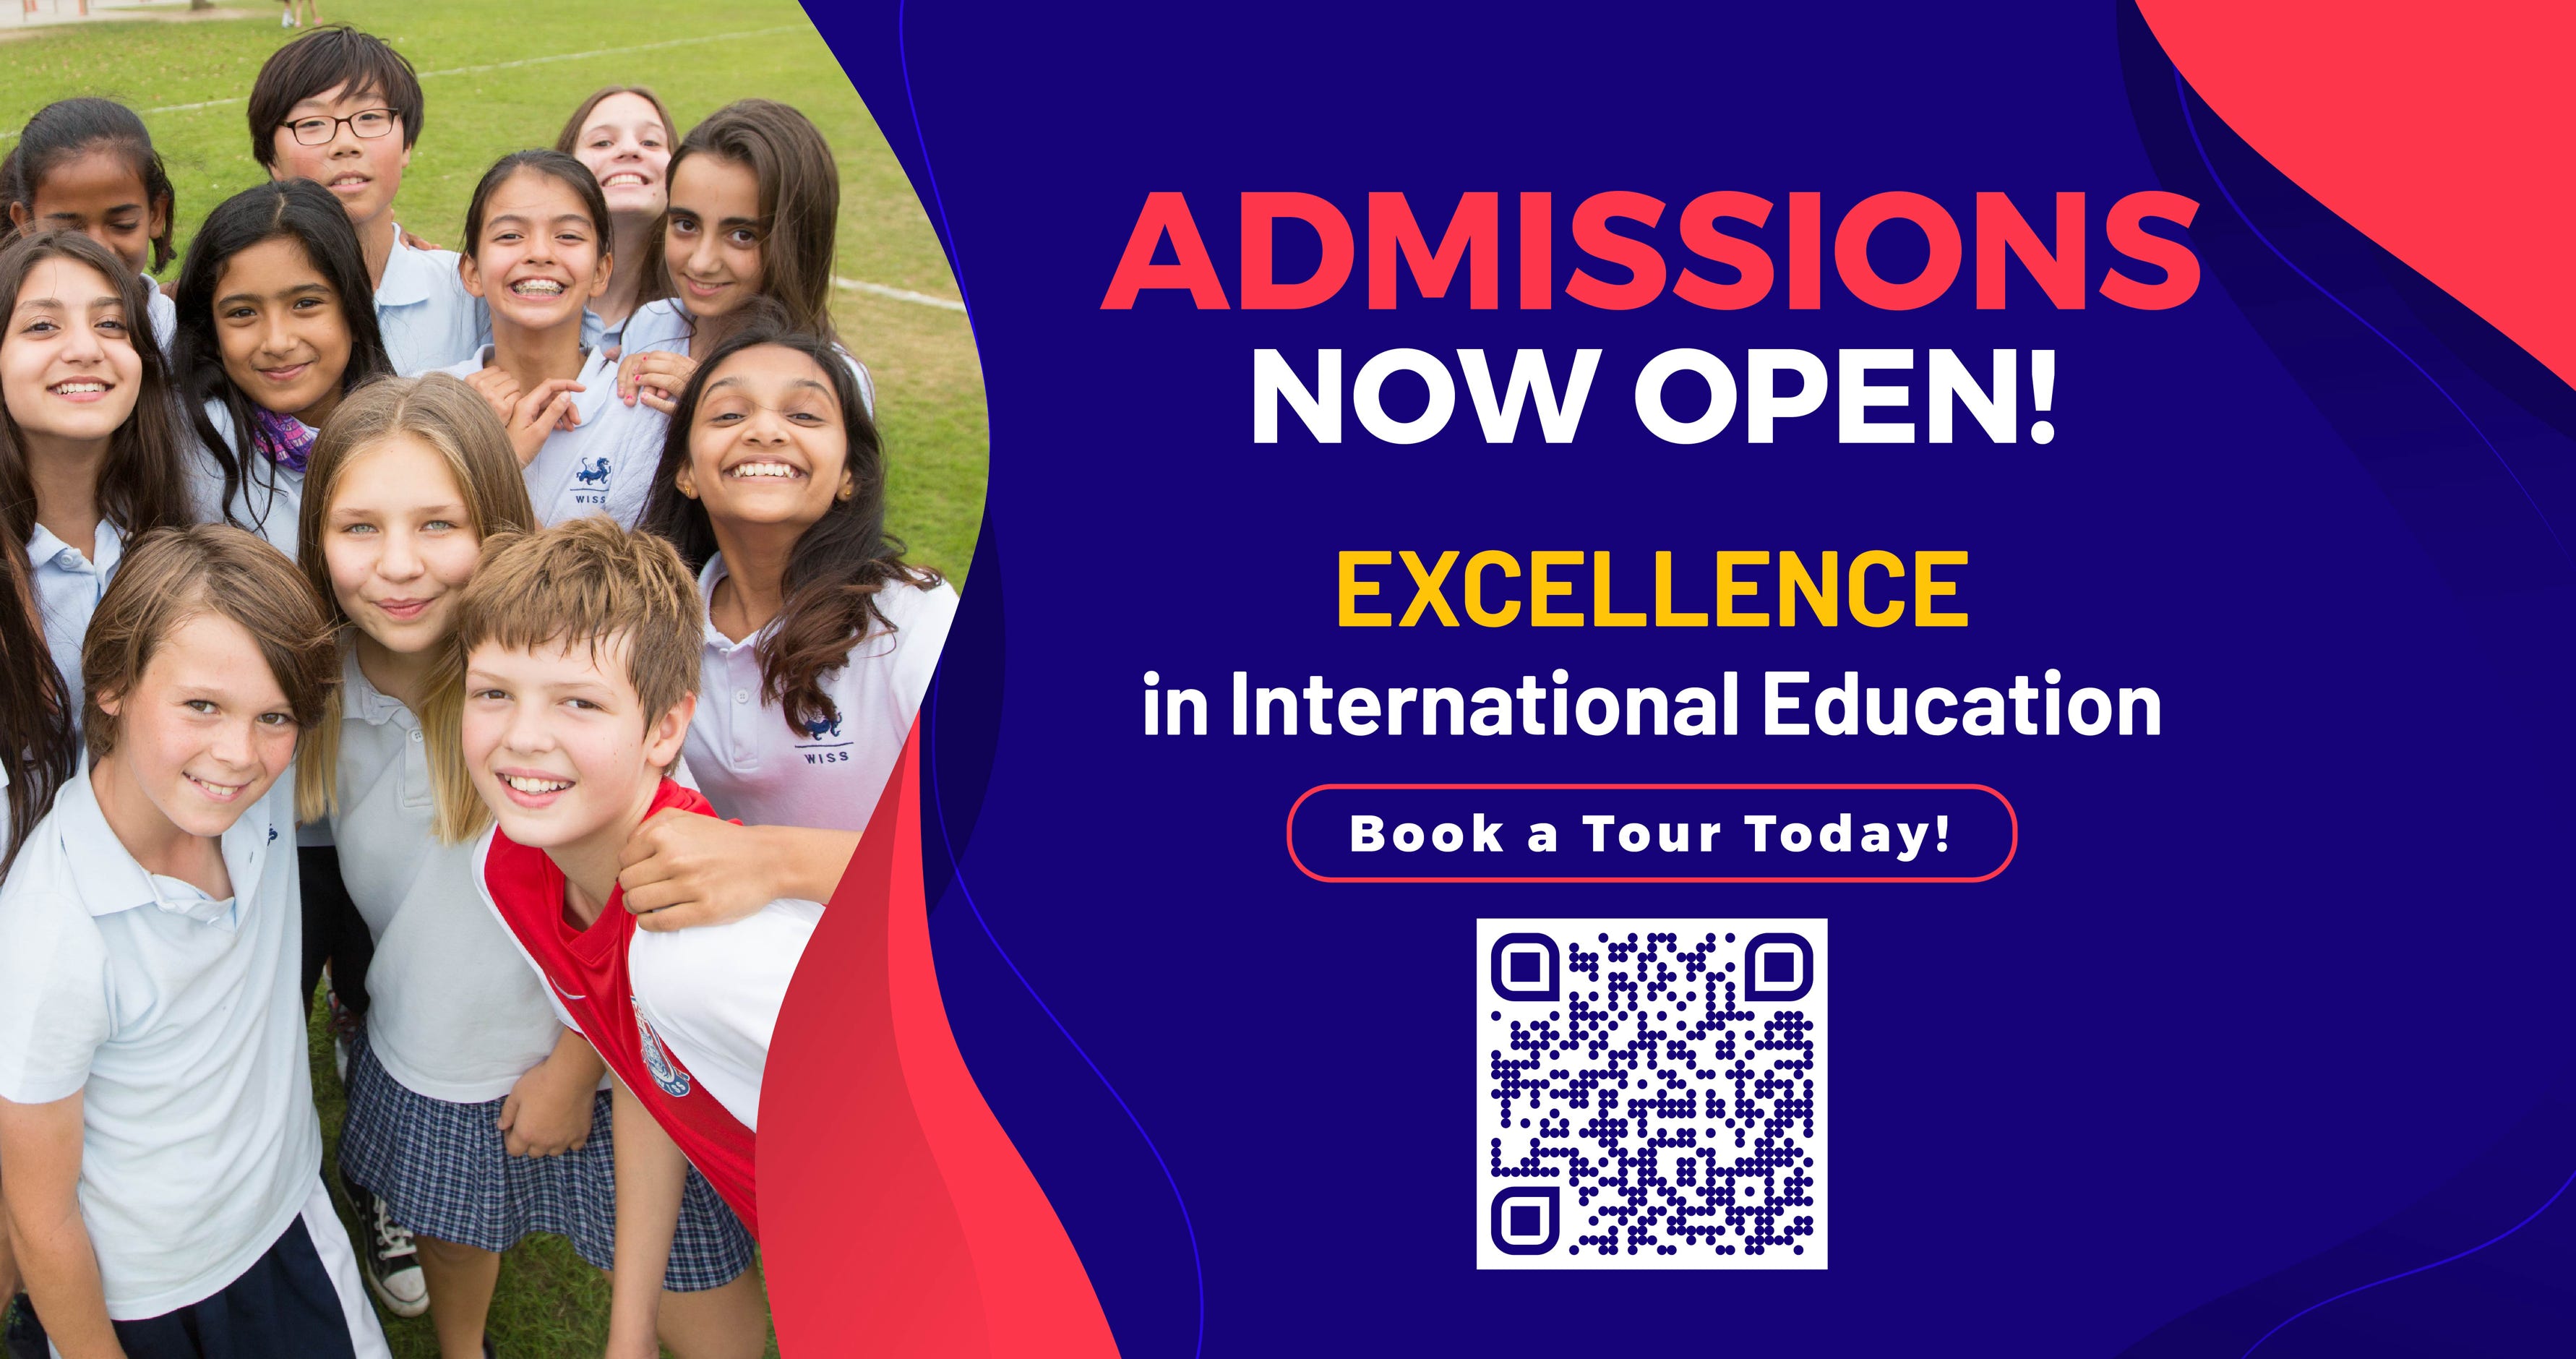 Join any of the upcoming student admission and recruitment events at the Western International School of Shanghai.  Find that best-fit school for the education of your child.  